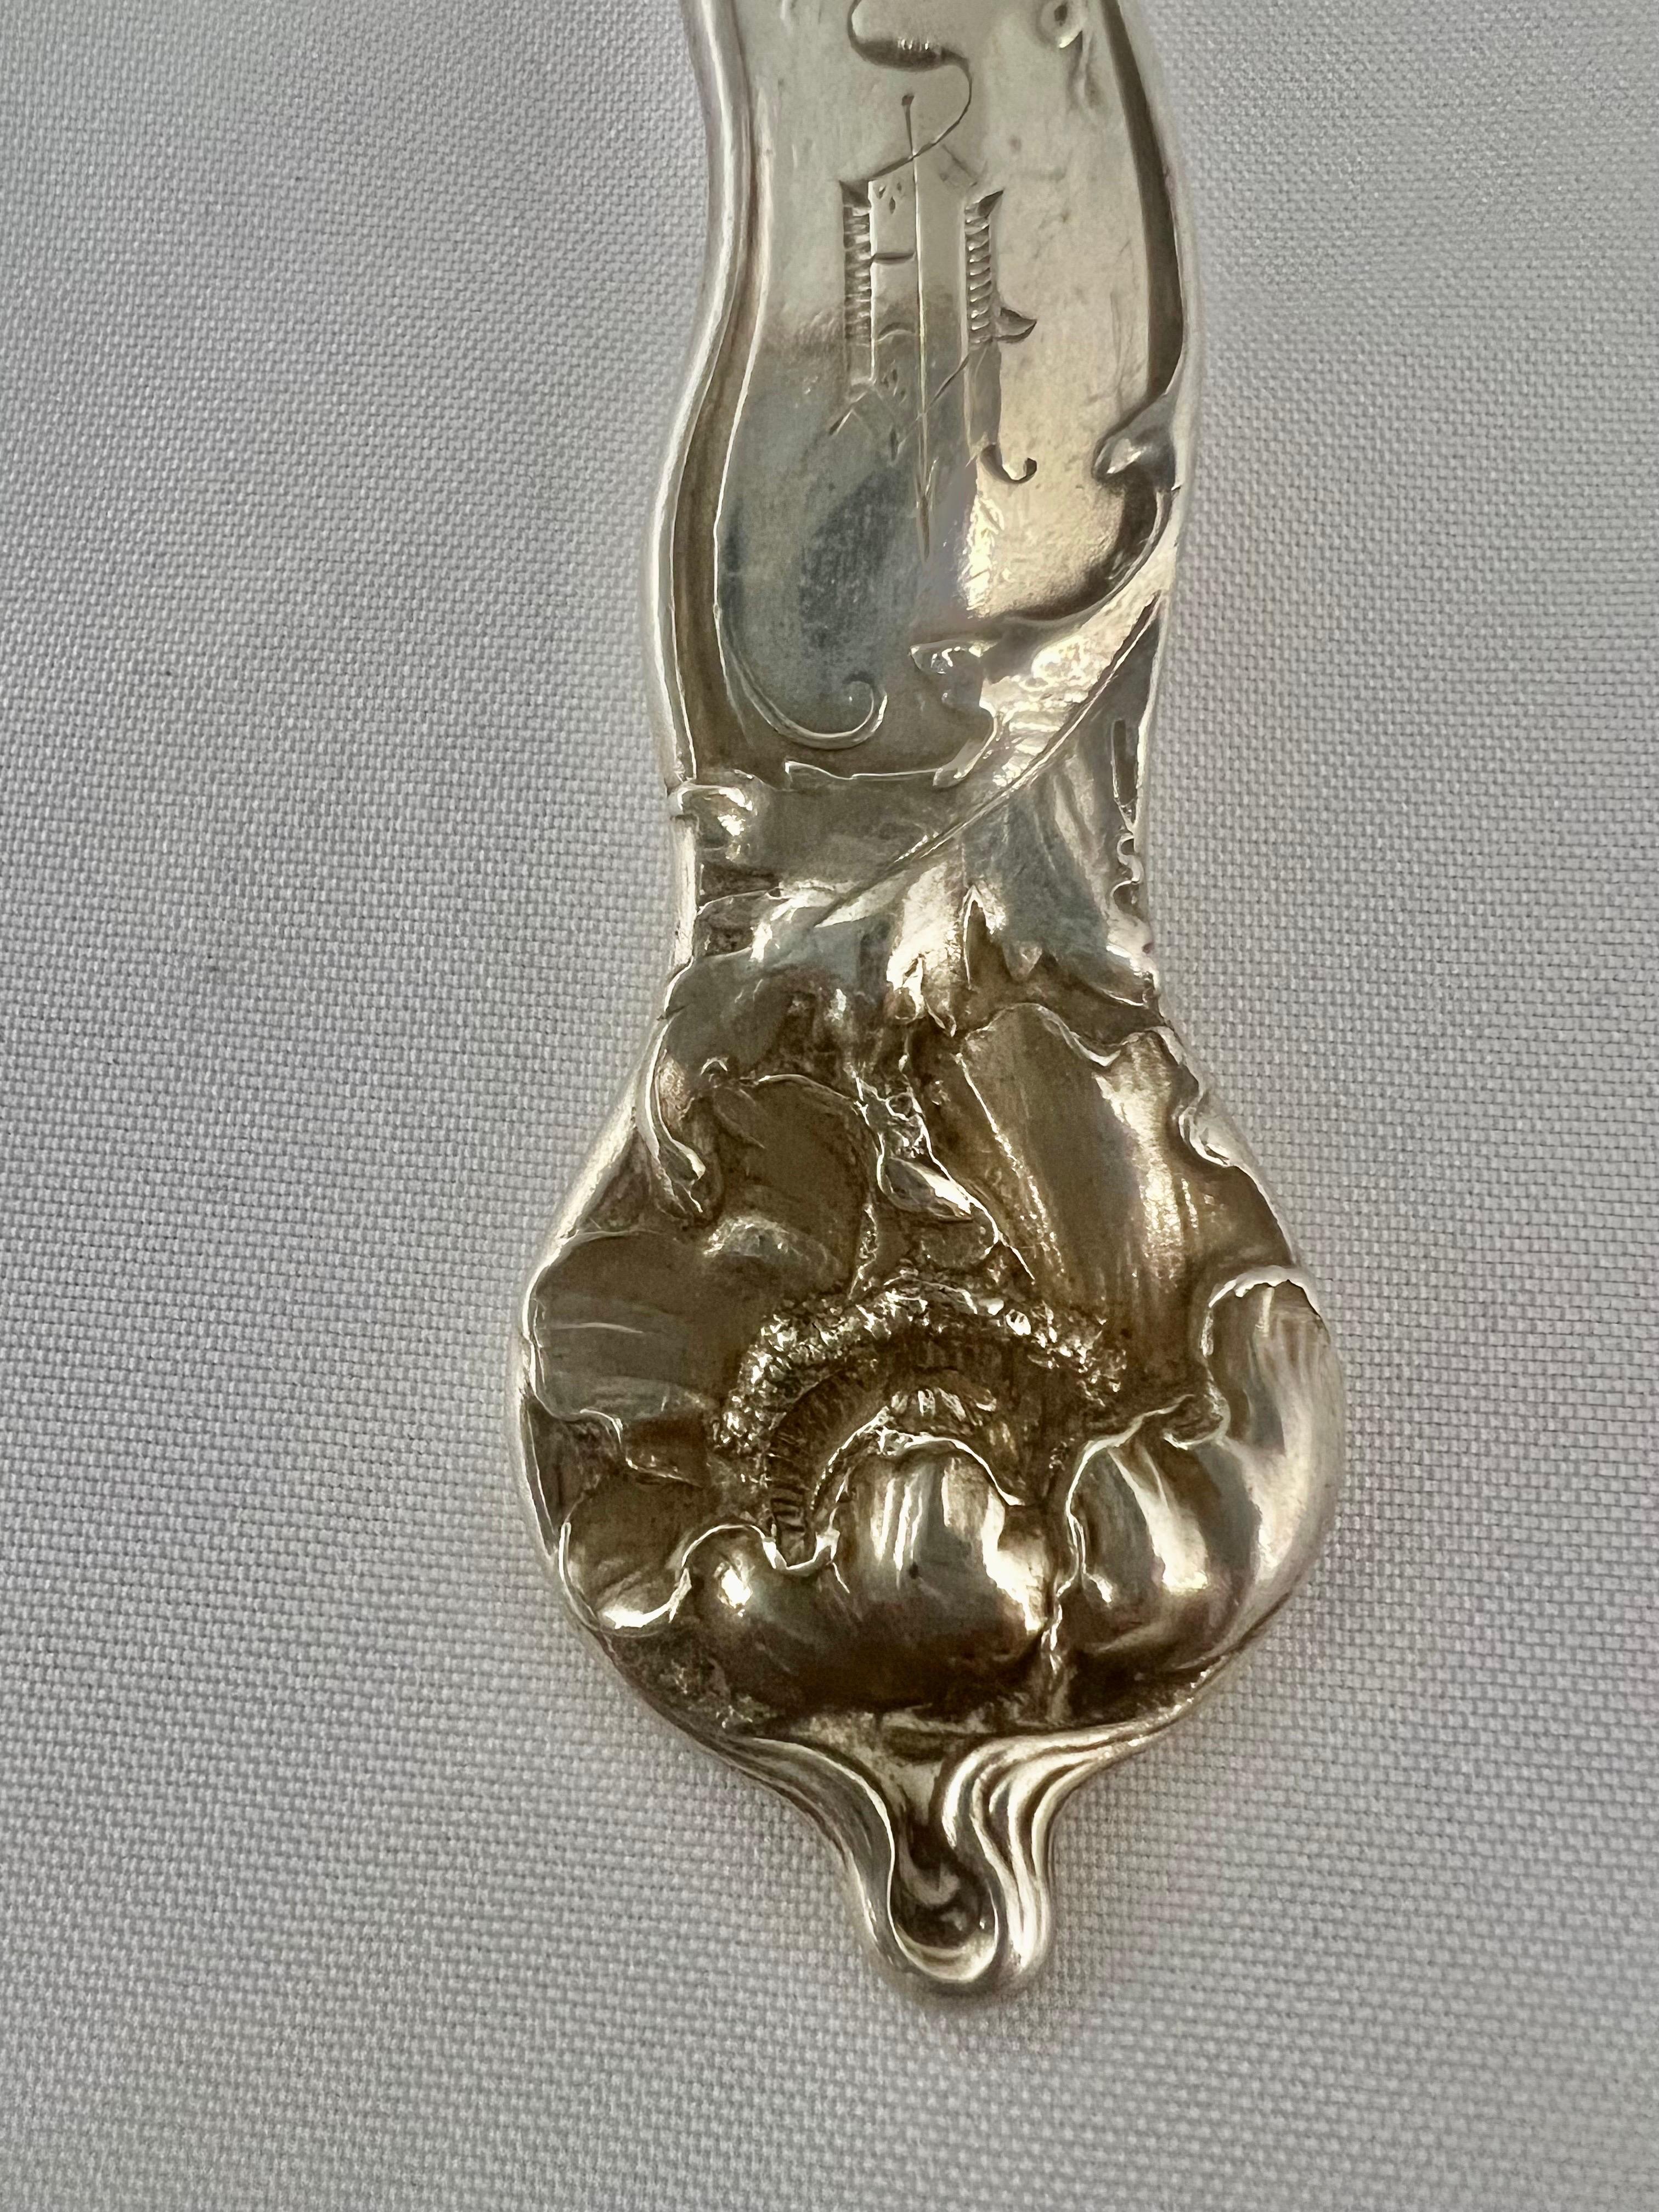 A sterling silver Art Nouveau Serving Spoon by George W. Shiebler & Company.  This piece showcases the distinctive and flowing lines characteristic of the Art Nouveau style.  Pieces from this era often feature nature-inspired motifs and intricate